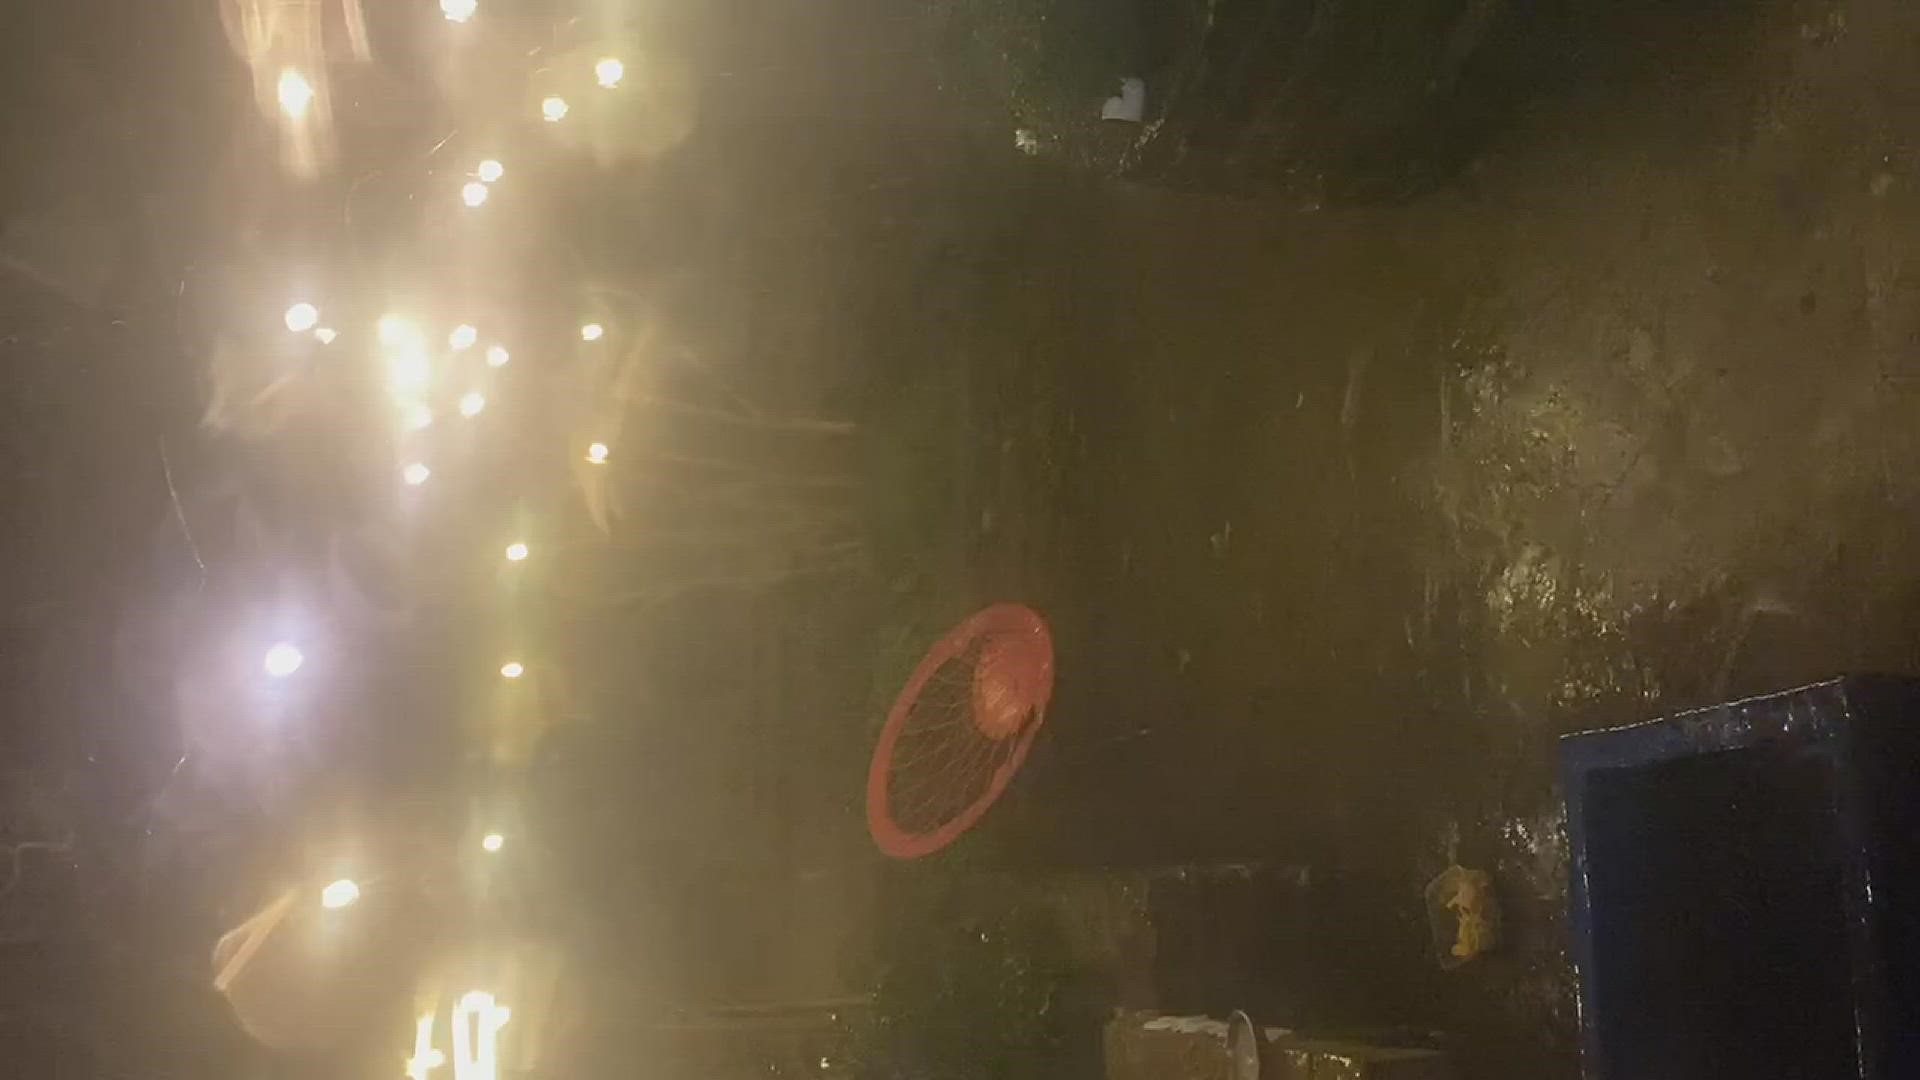 Viewer Jason Lurie sent in video of hail storms in Cordova.